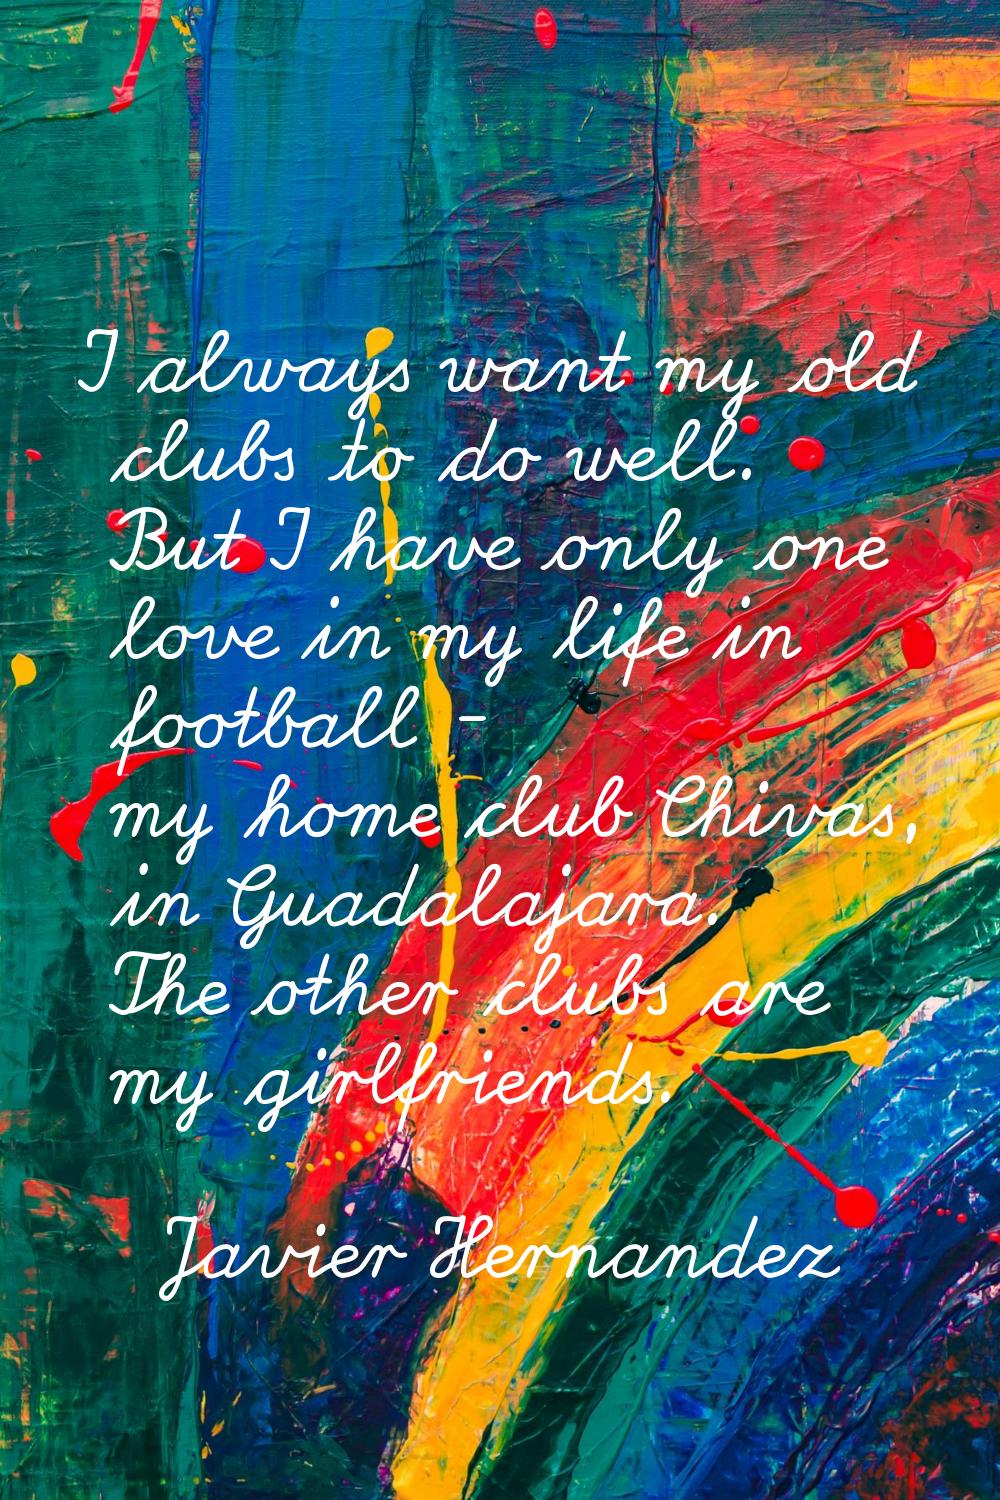 I always want my old clubs to do well. But I have only one love in my life in football - my home cl